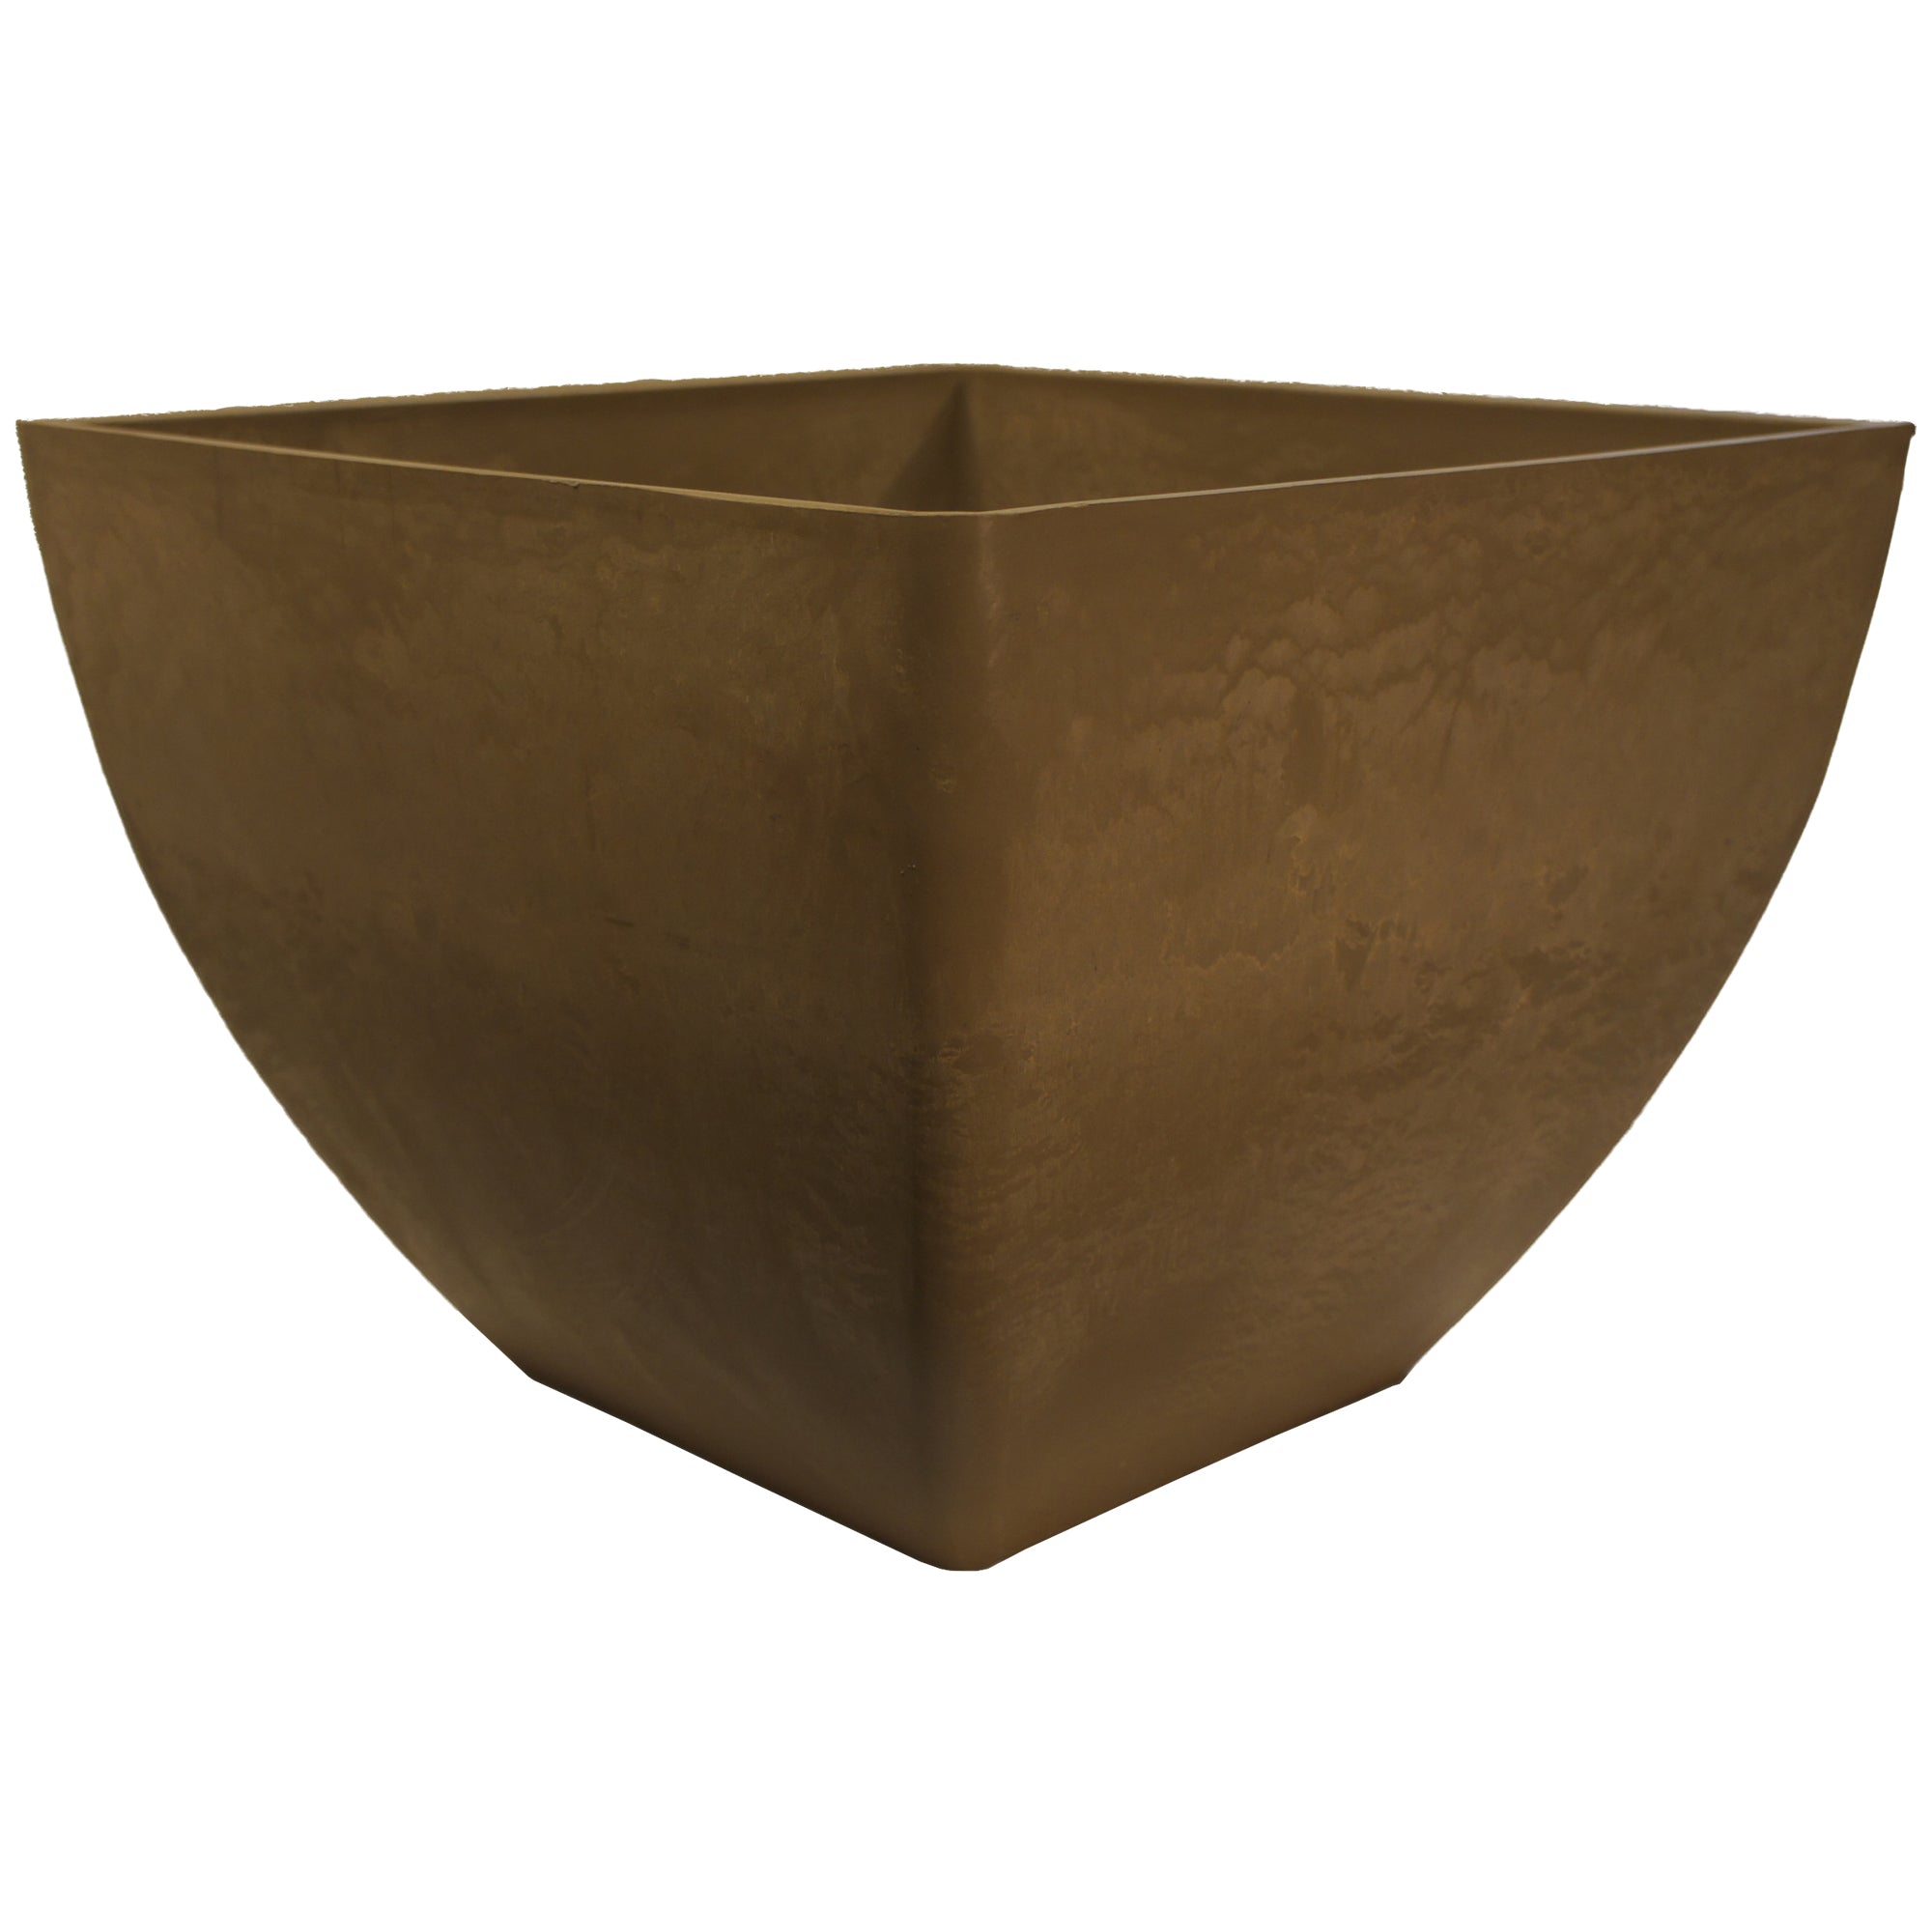 20 inch square planter in oak on a white background